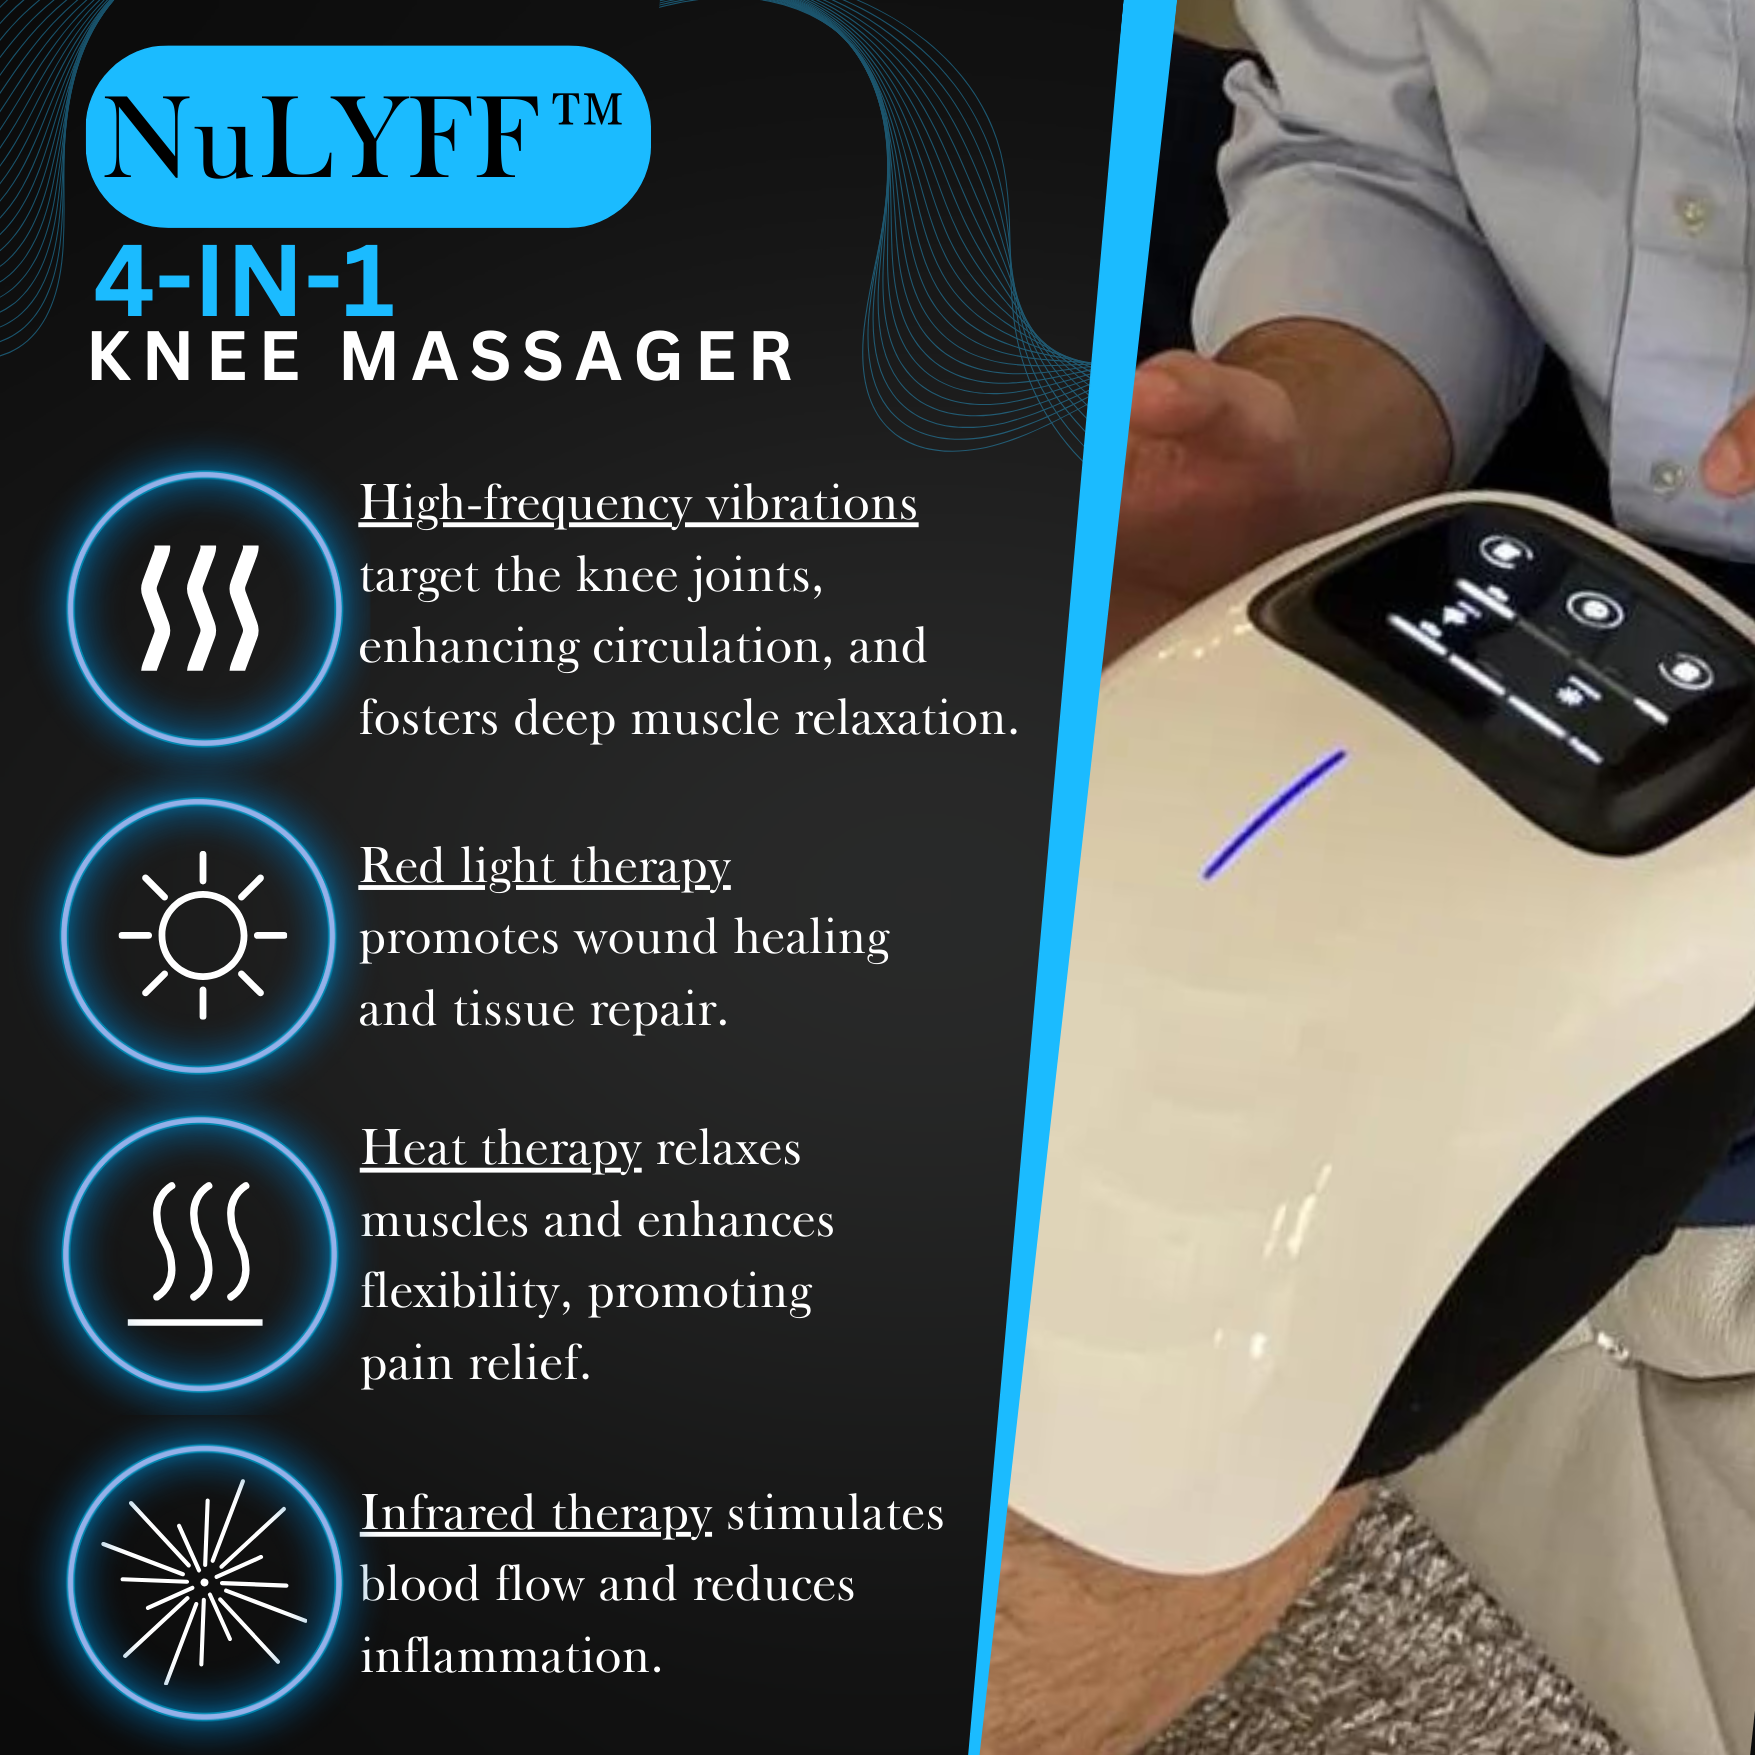 Image of a man sitting on the couch adjusting the setting for his desired relief he is looking from NuLYFF™ 4-in-1 Knee Massager. He is adjusting High-frequency vibraiton that enhancing circulation, and fosters deep muscle relaxation. Red light therapy promotes wound healing and tissue repair. Heat therapy relaxes muscle and enhances flexibility. Infrared therapy stimulates blood flow and reduces inflammation from stiff, swollen, arthritis, and osteoarthritis.